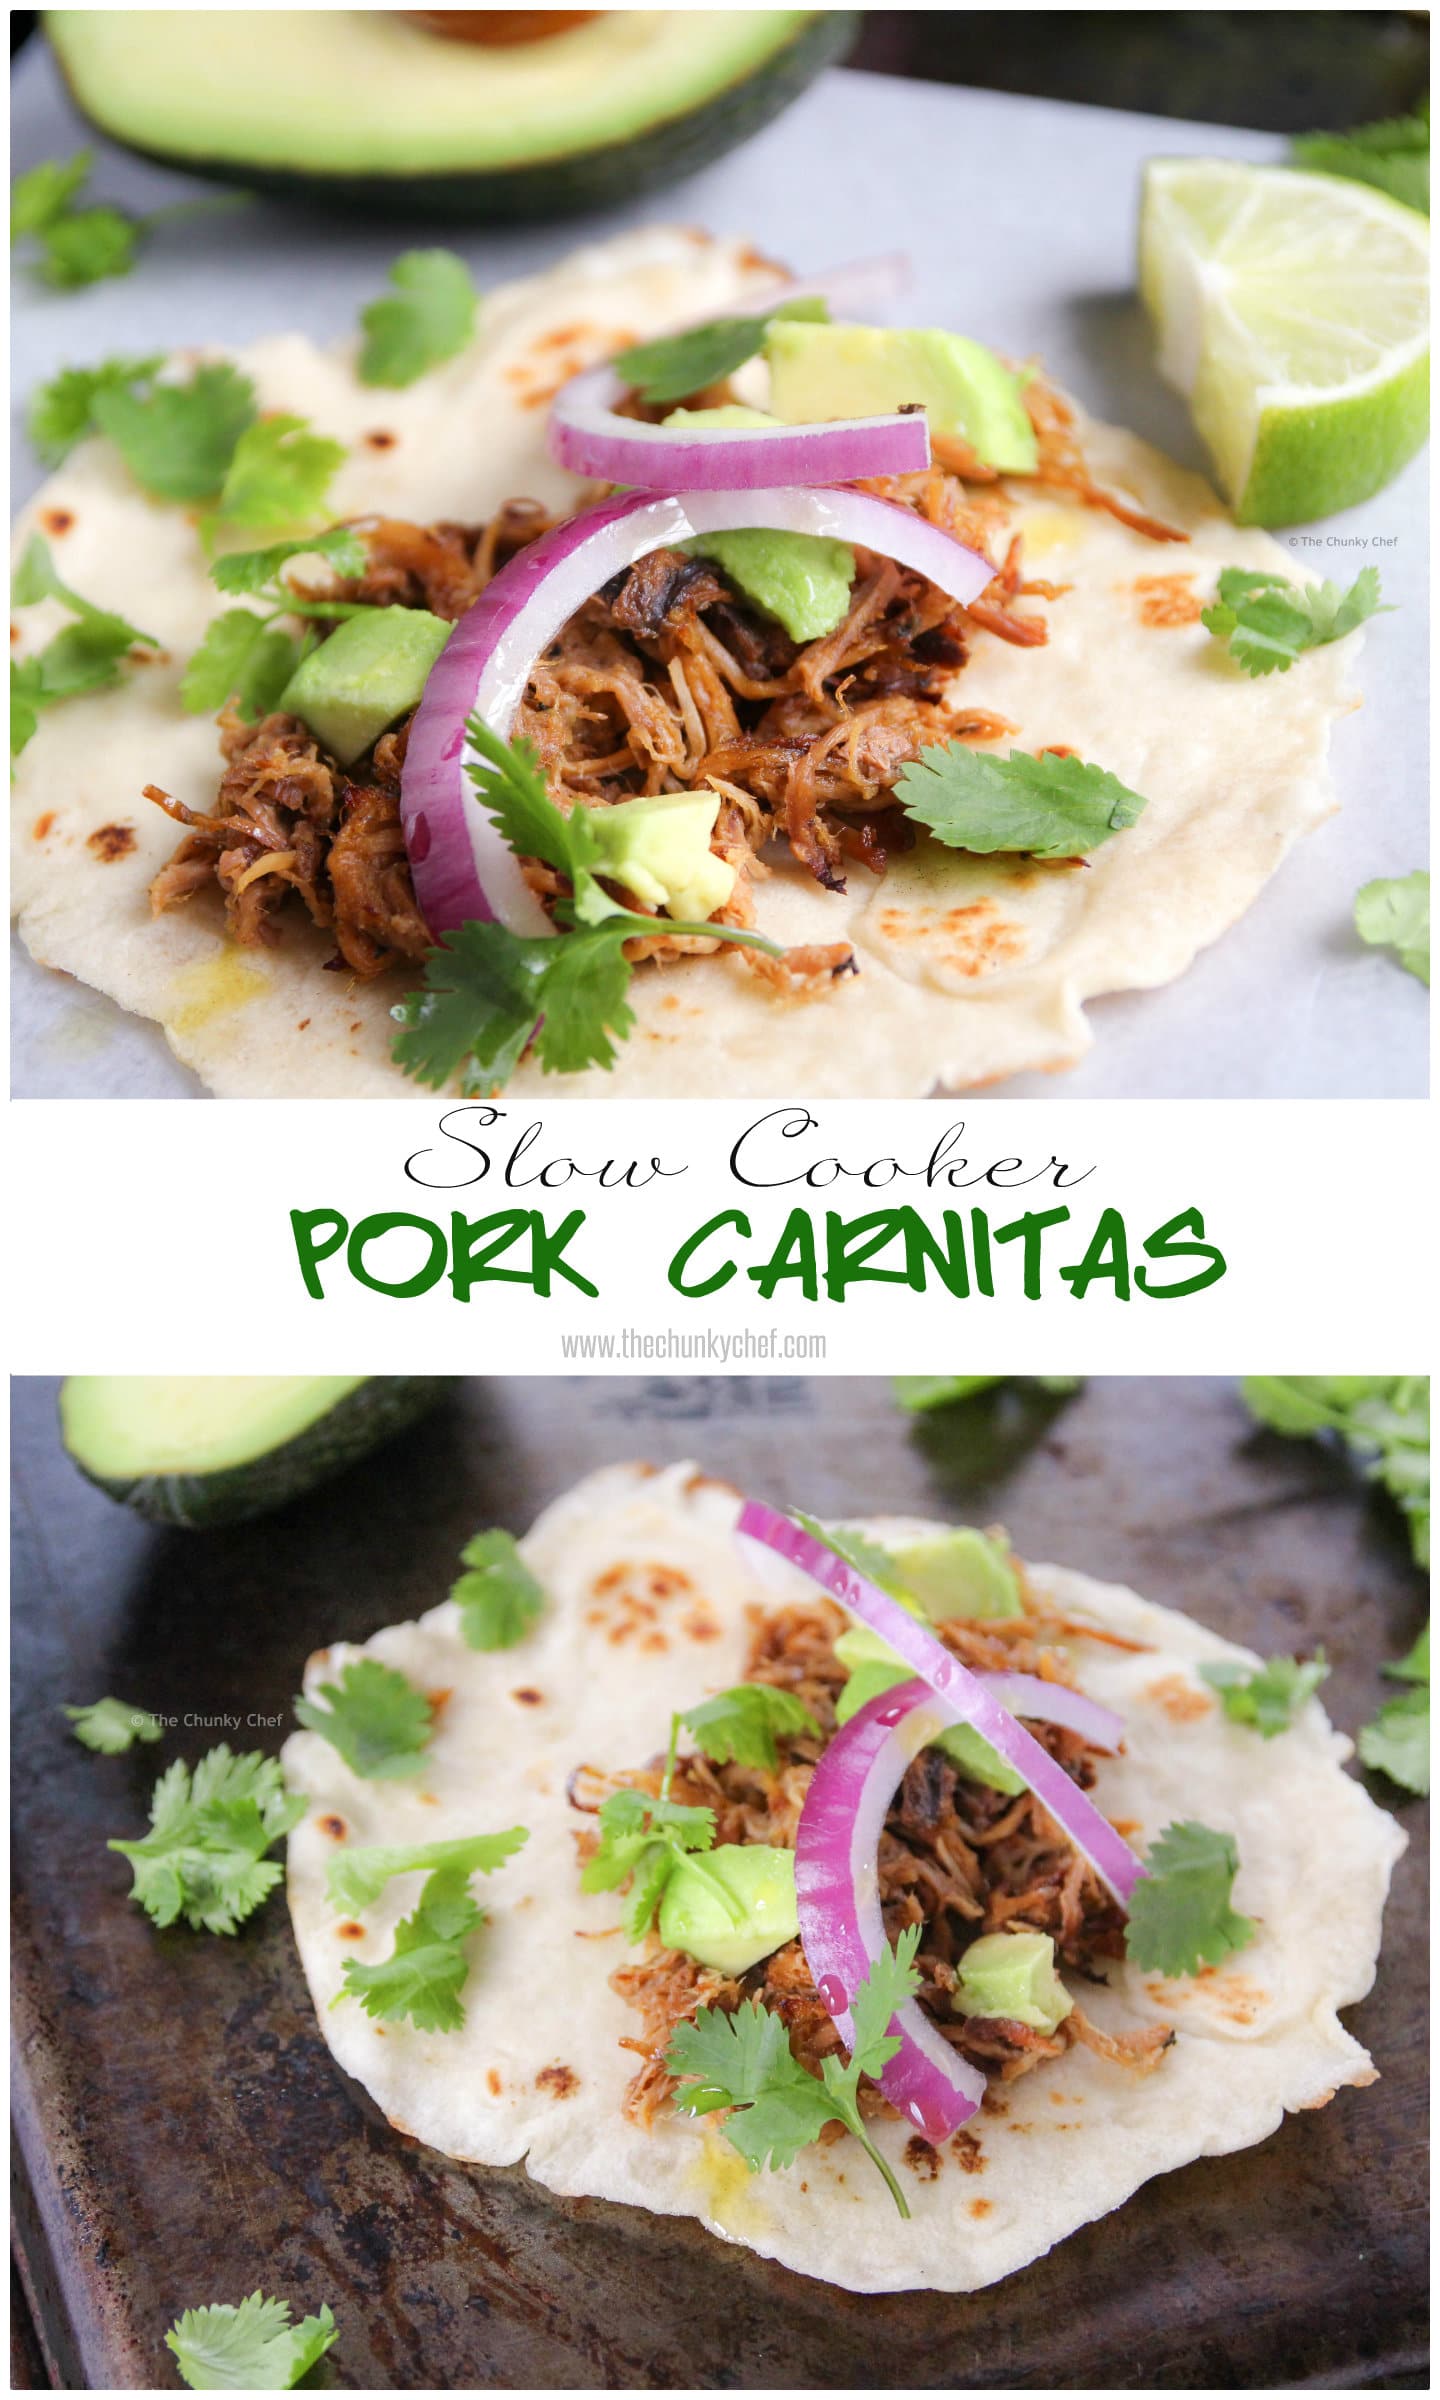 The amazing combination of spices and citrus make these pork carnitas an absolute must try recipe! And they're done in the slow cooker!